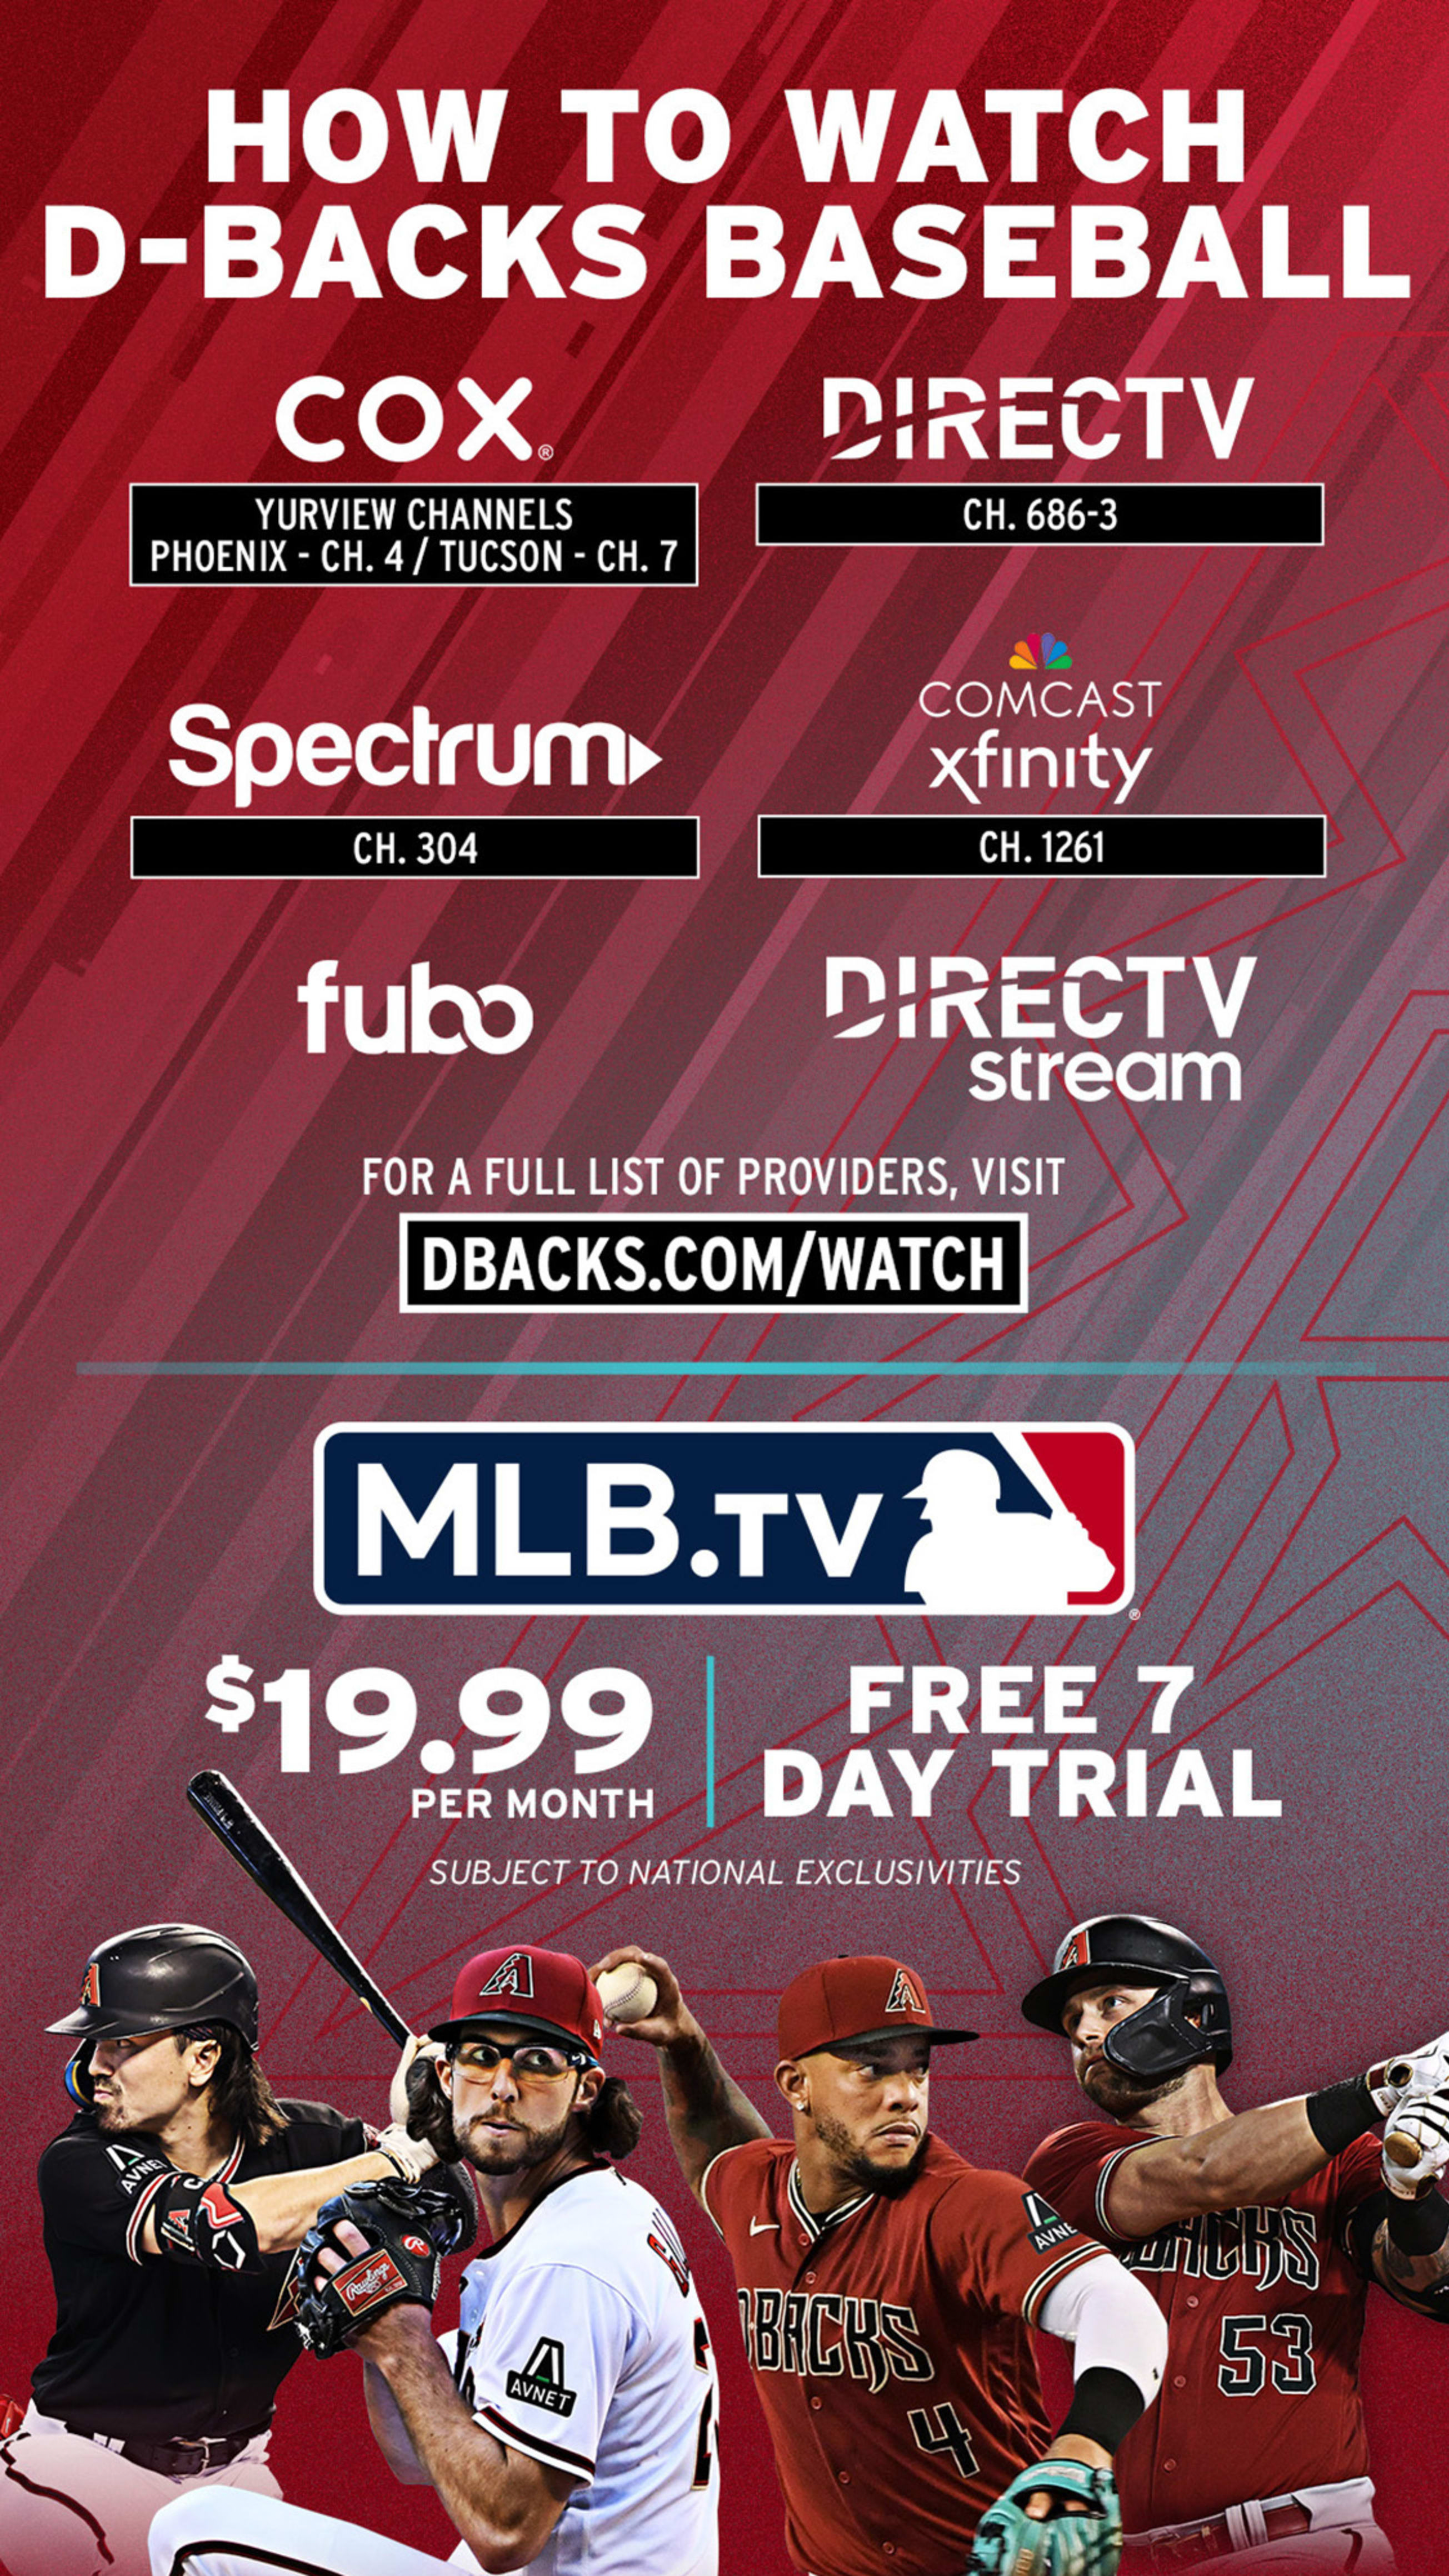 D-backs Games: How to Watch